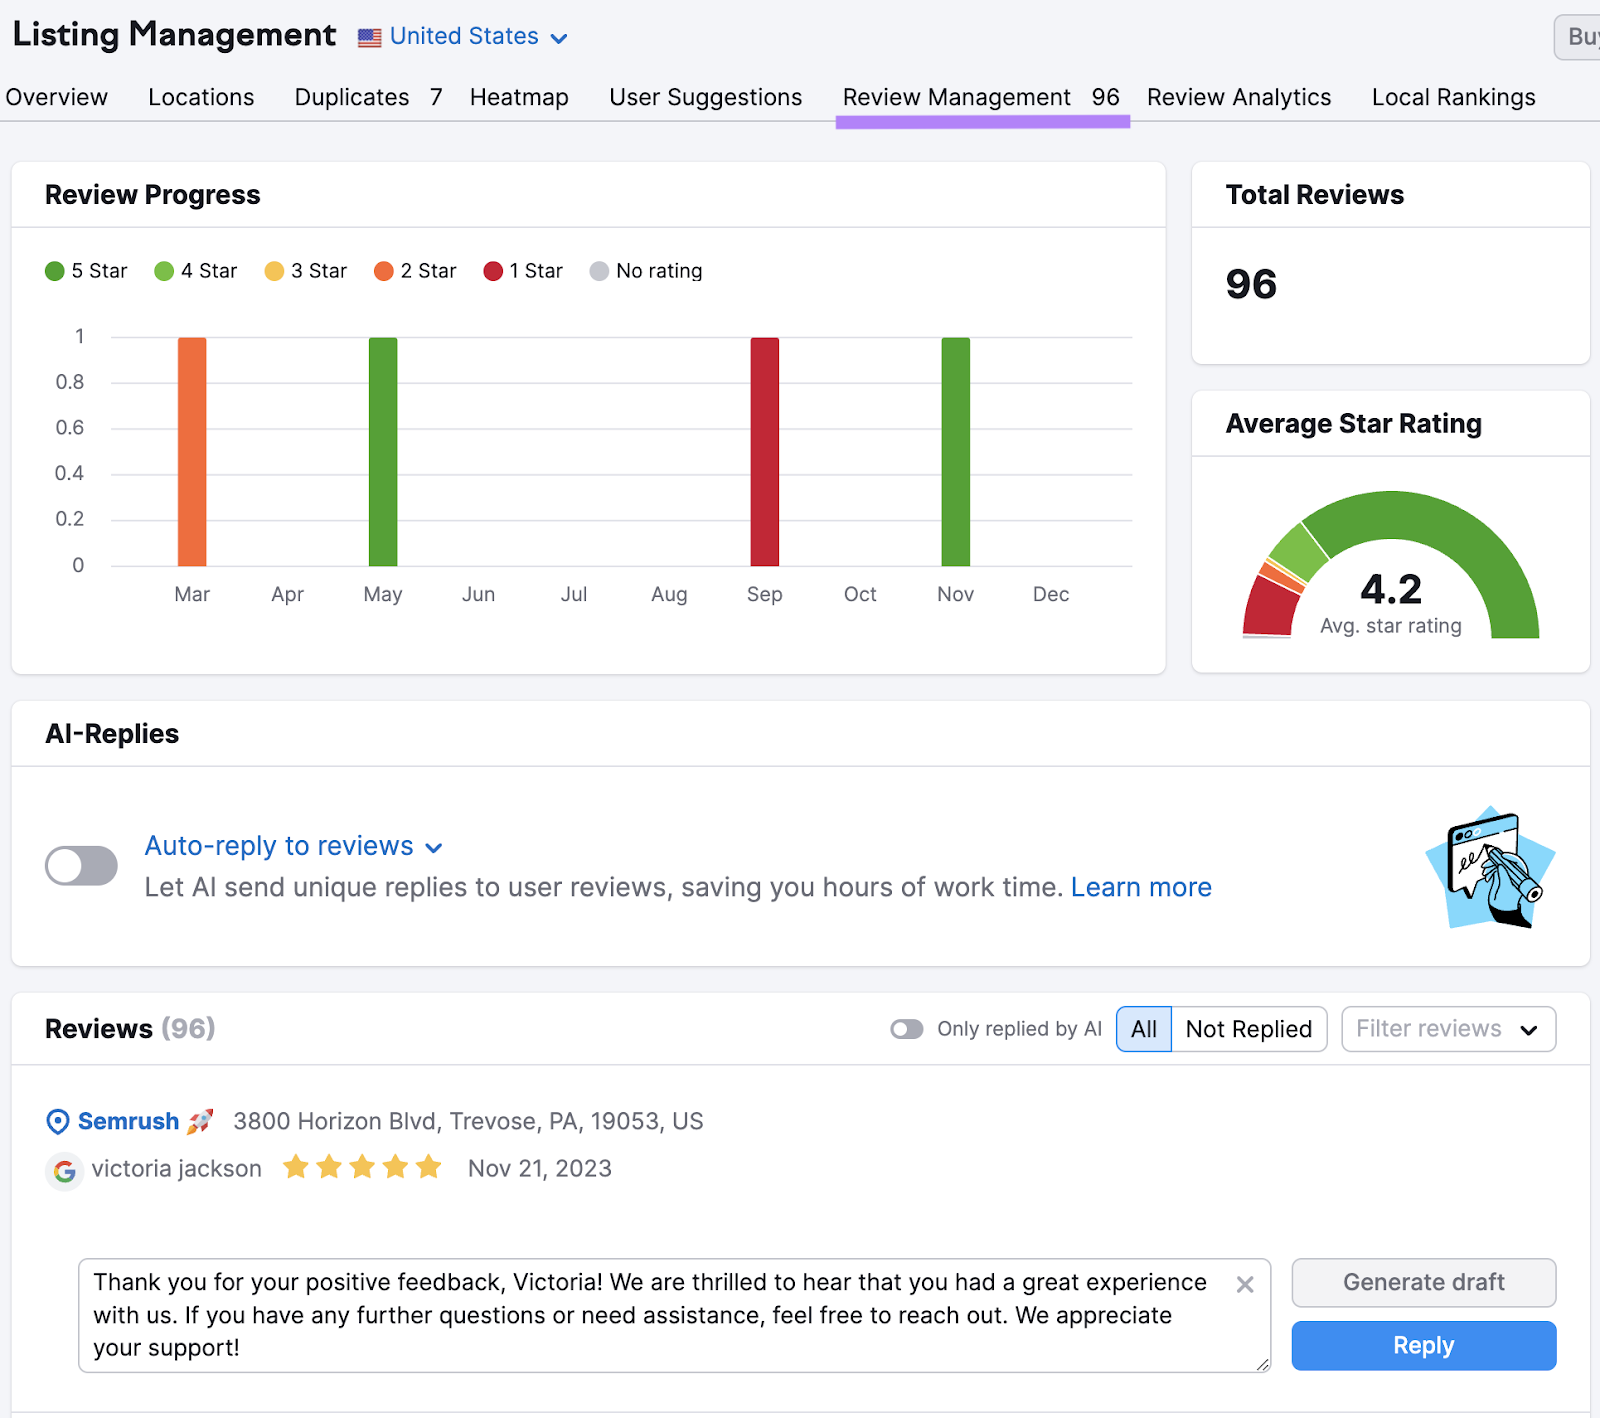 "Review Management" dashboard in Listing Management tool